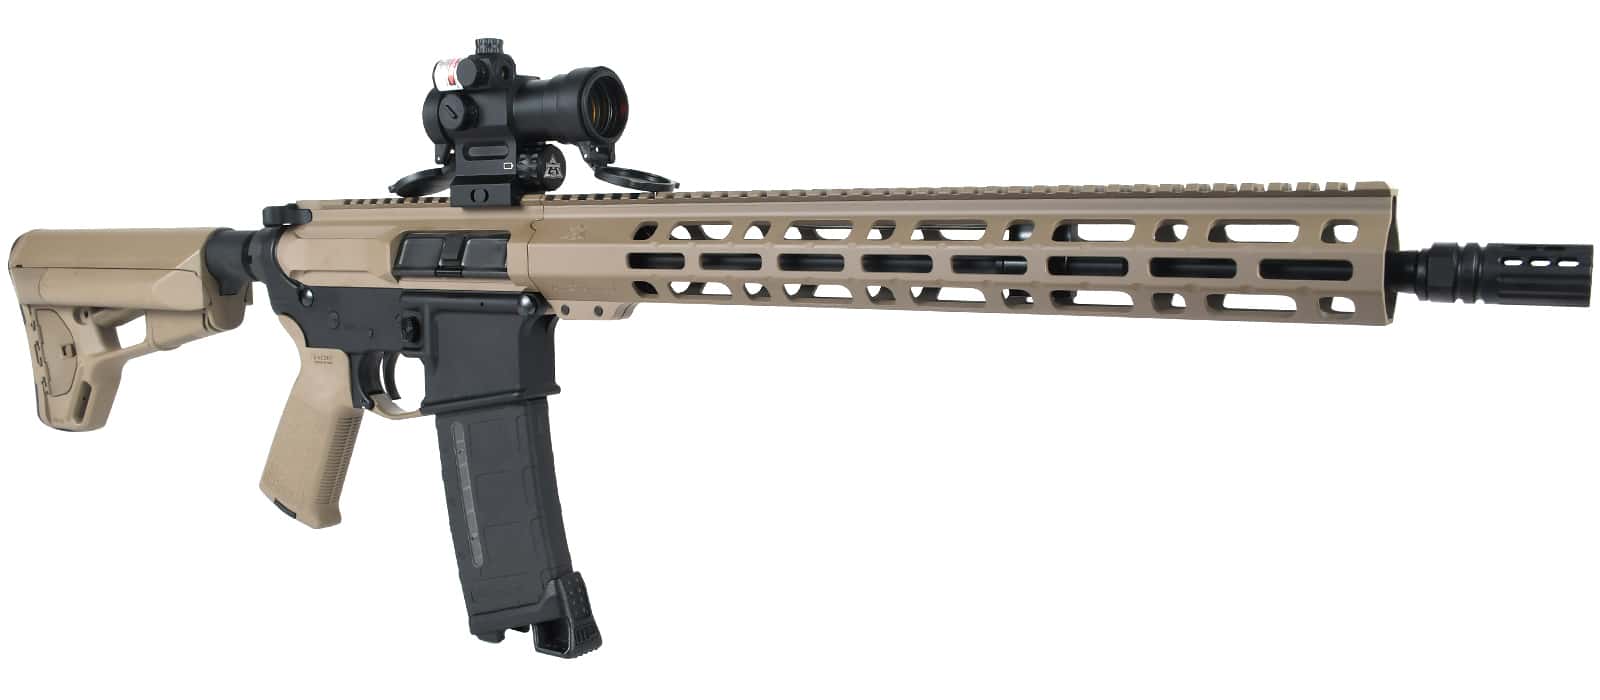 This Upper Group Uses a 15 Inch Handguard with Magpul Flat Dark Earth Cerakote